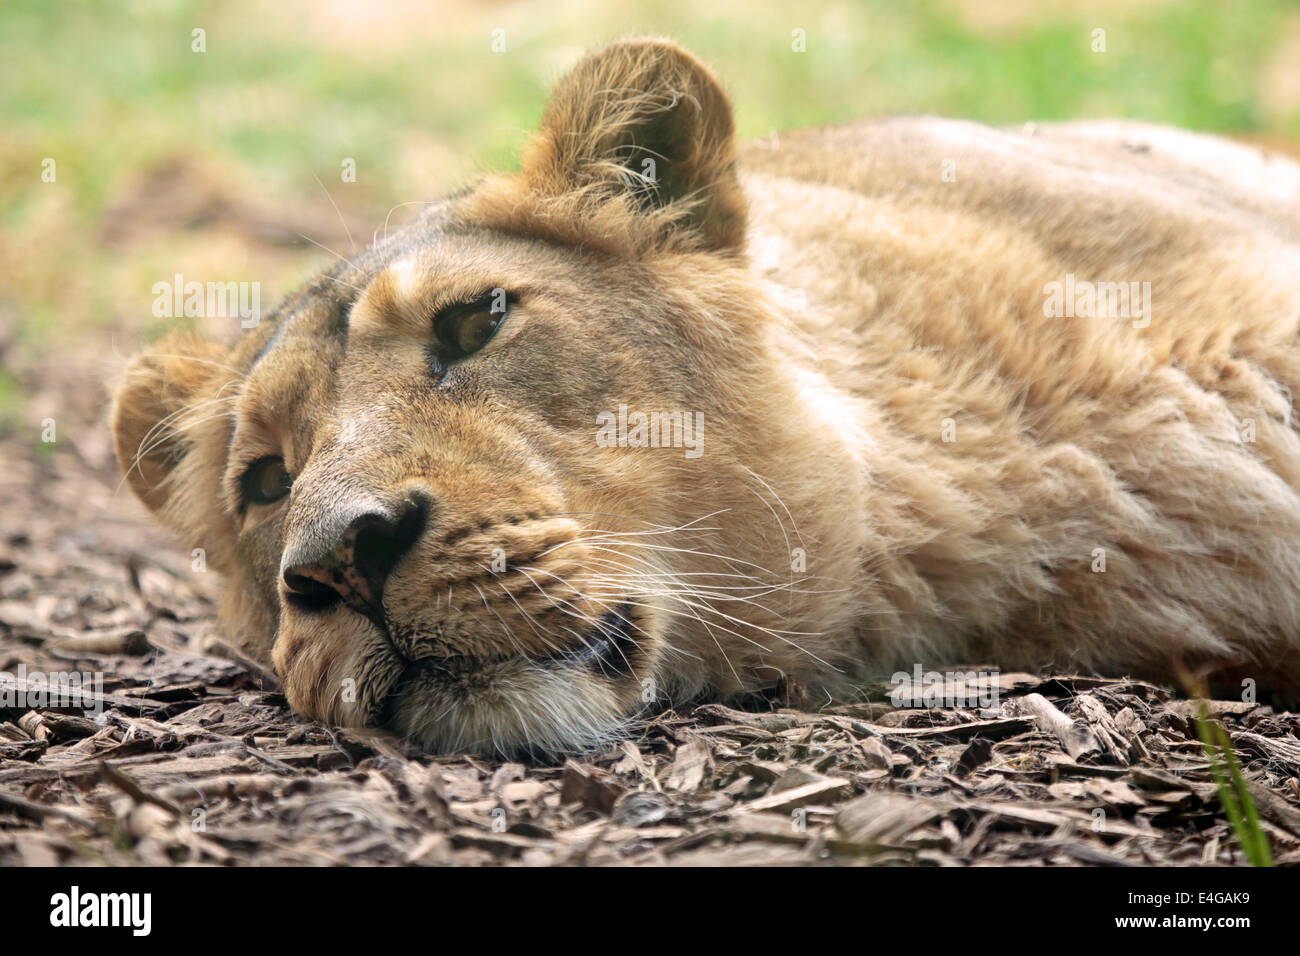 A female lion (Panthera leo) is sleeping on the ground Stock Photo